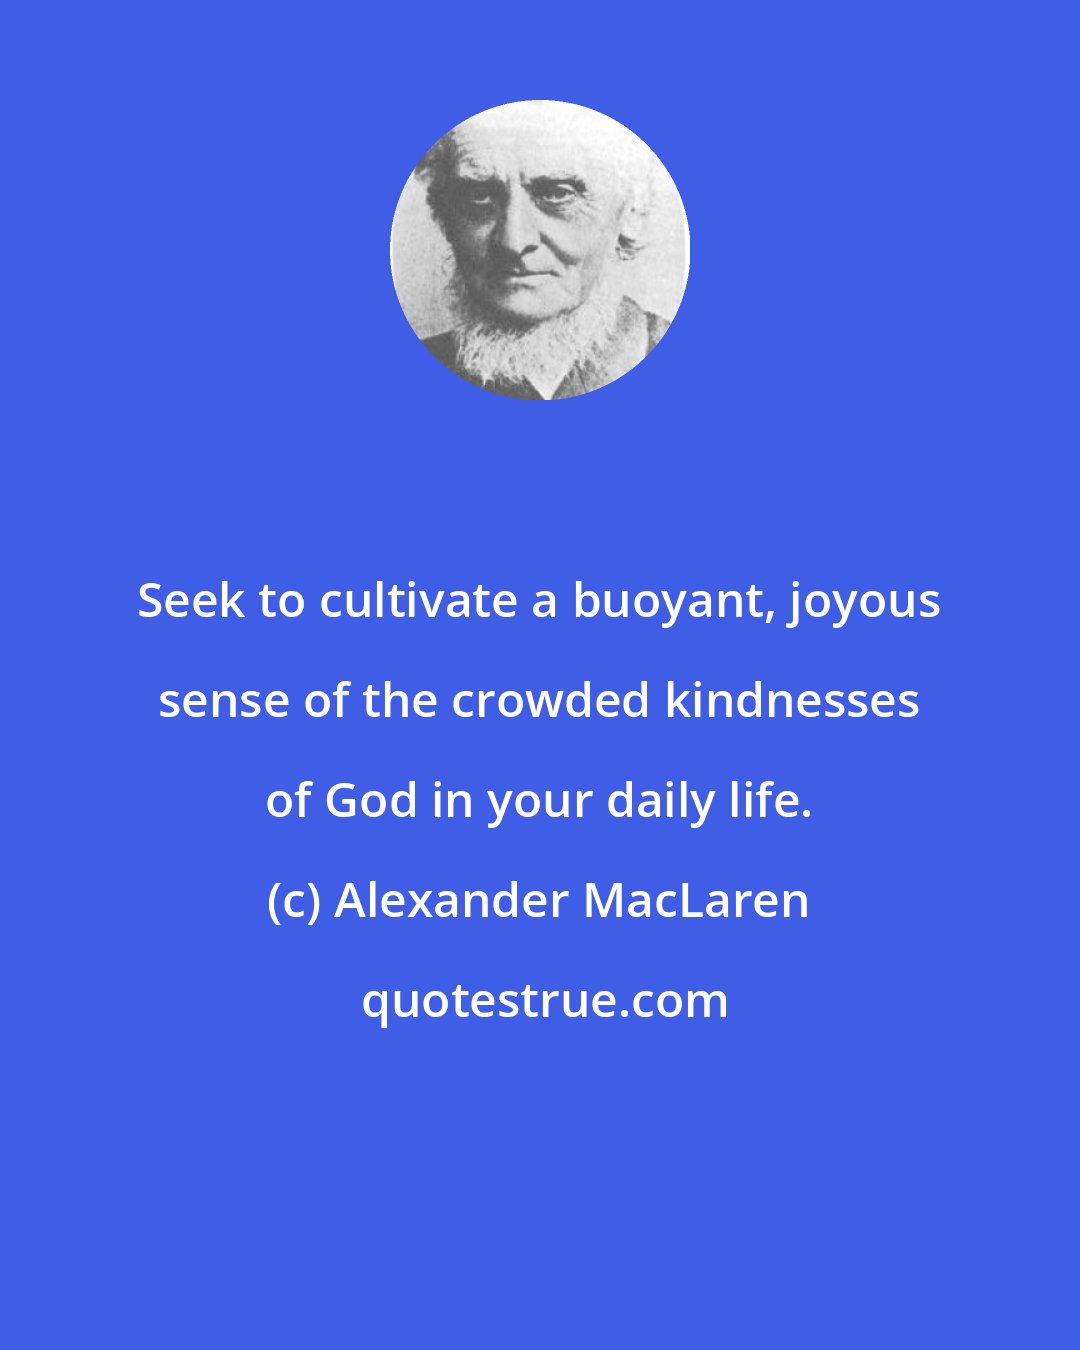 Alexander MacLaren: Seek to cultivate a buoyant, joyous sense of the crowded kindnesses of God in your daily life.